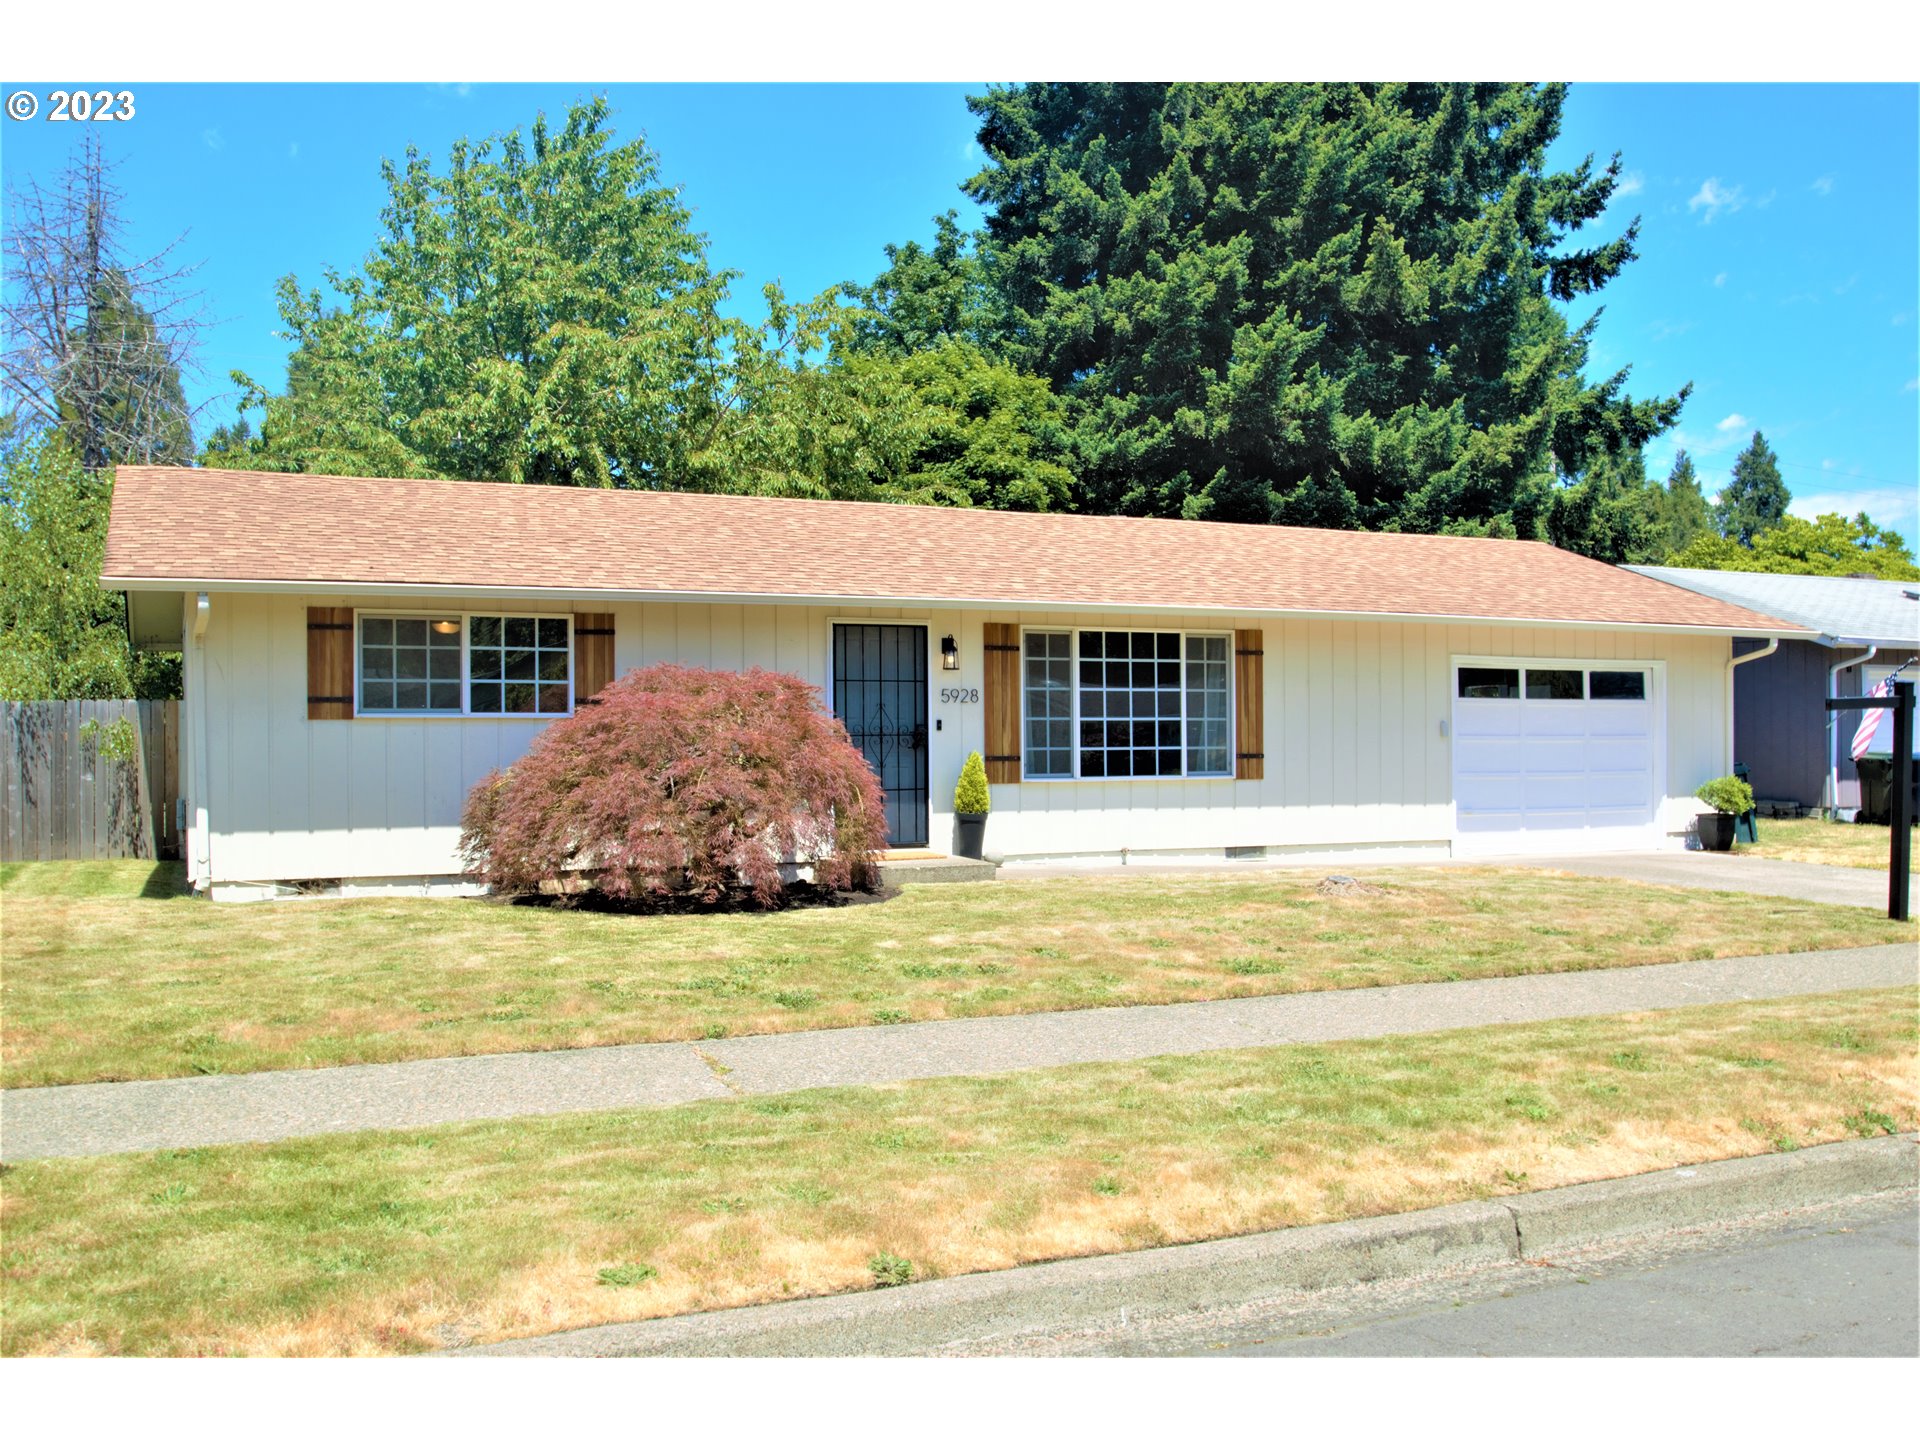 5928 G ST, Springfield, OR 97478